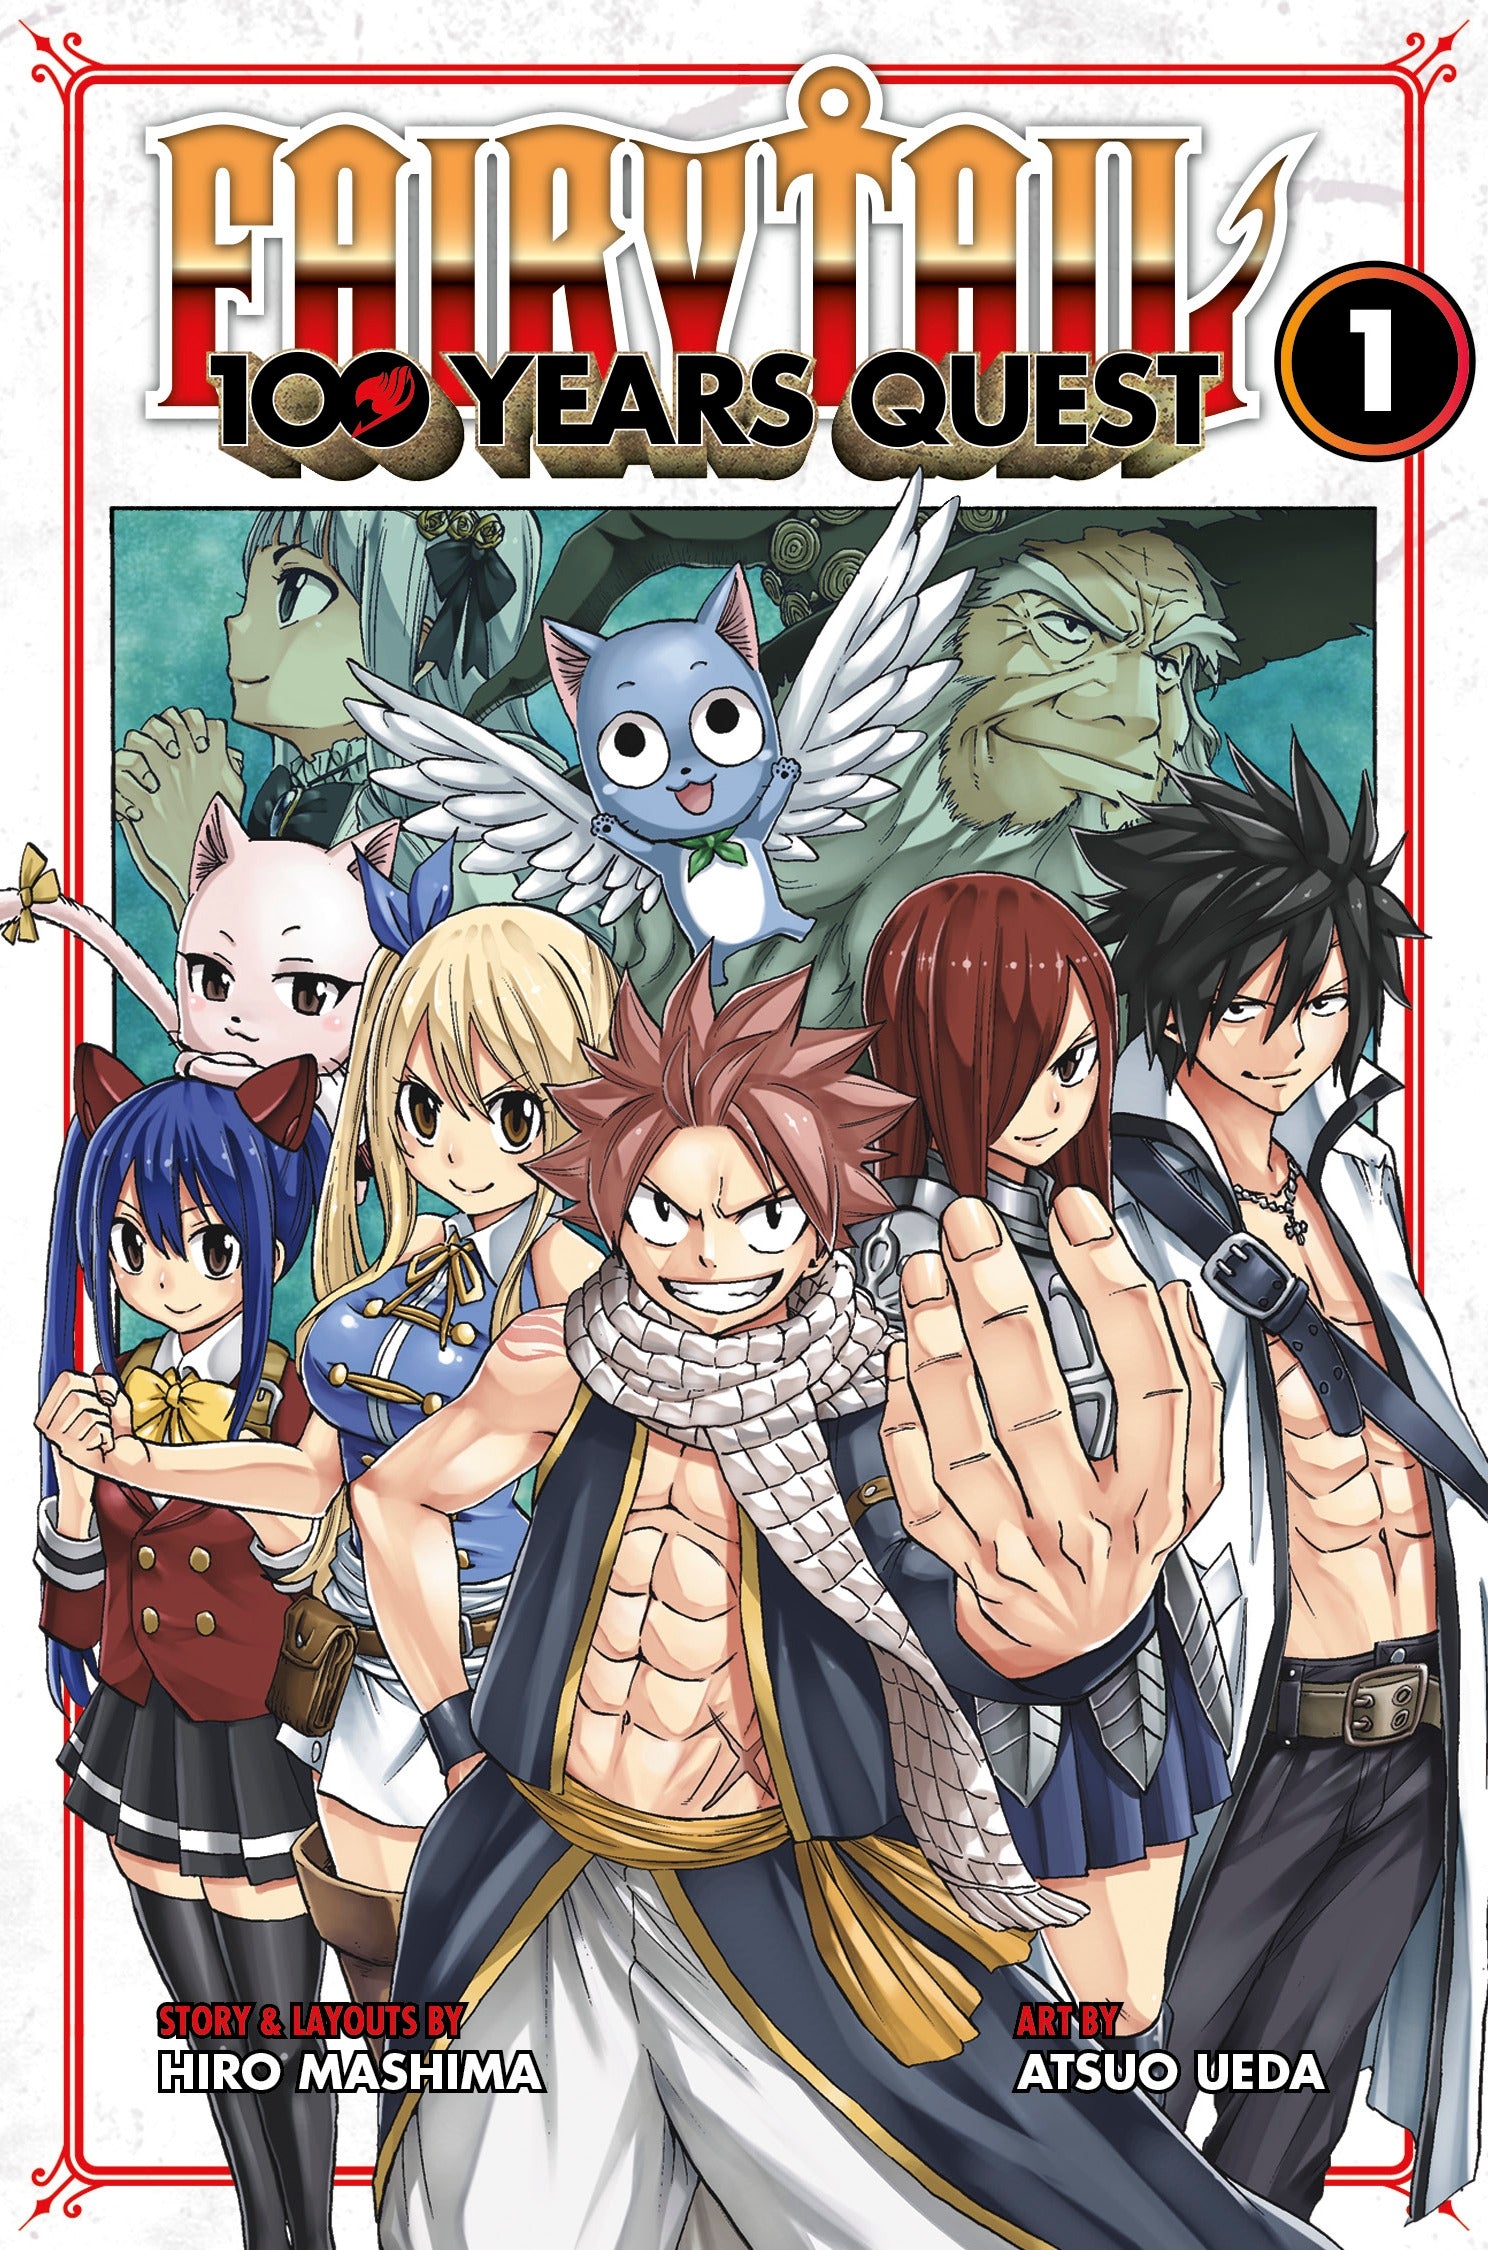 FAIRY TAIL: 100 Years Quest, Vol.1